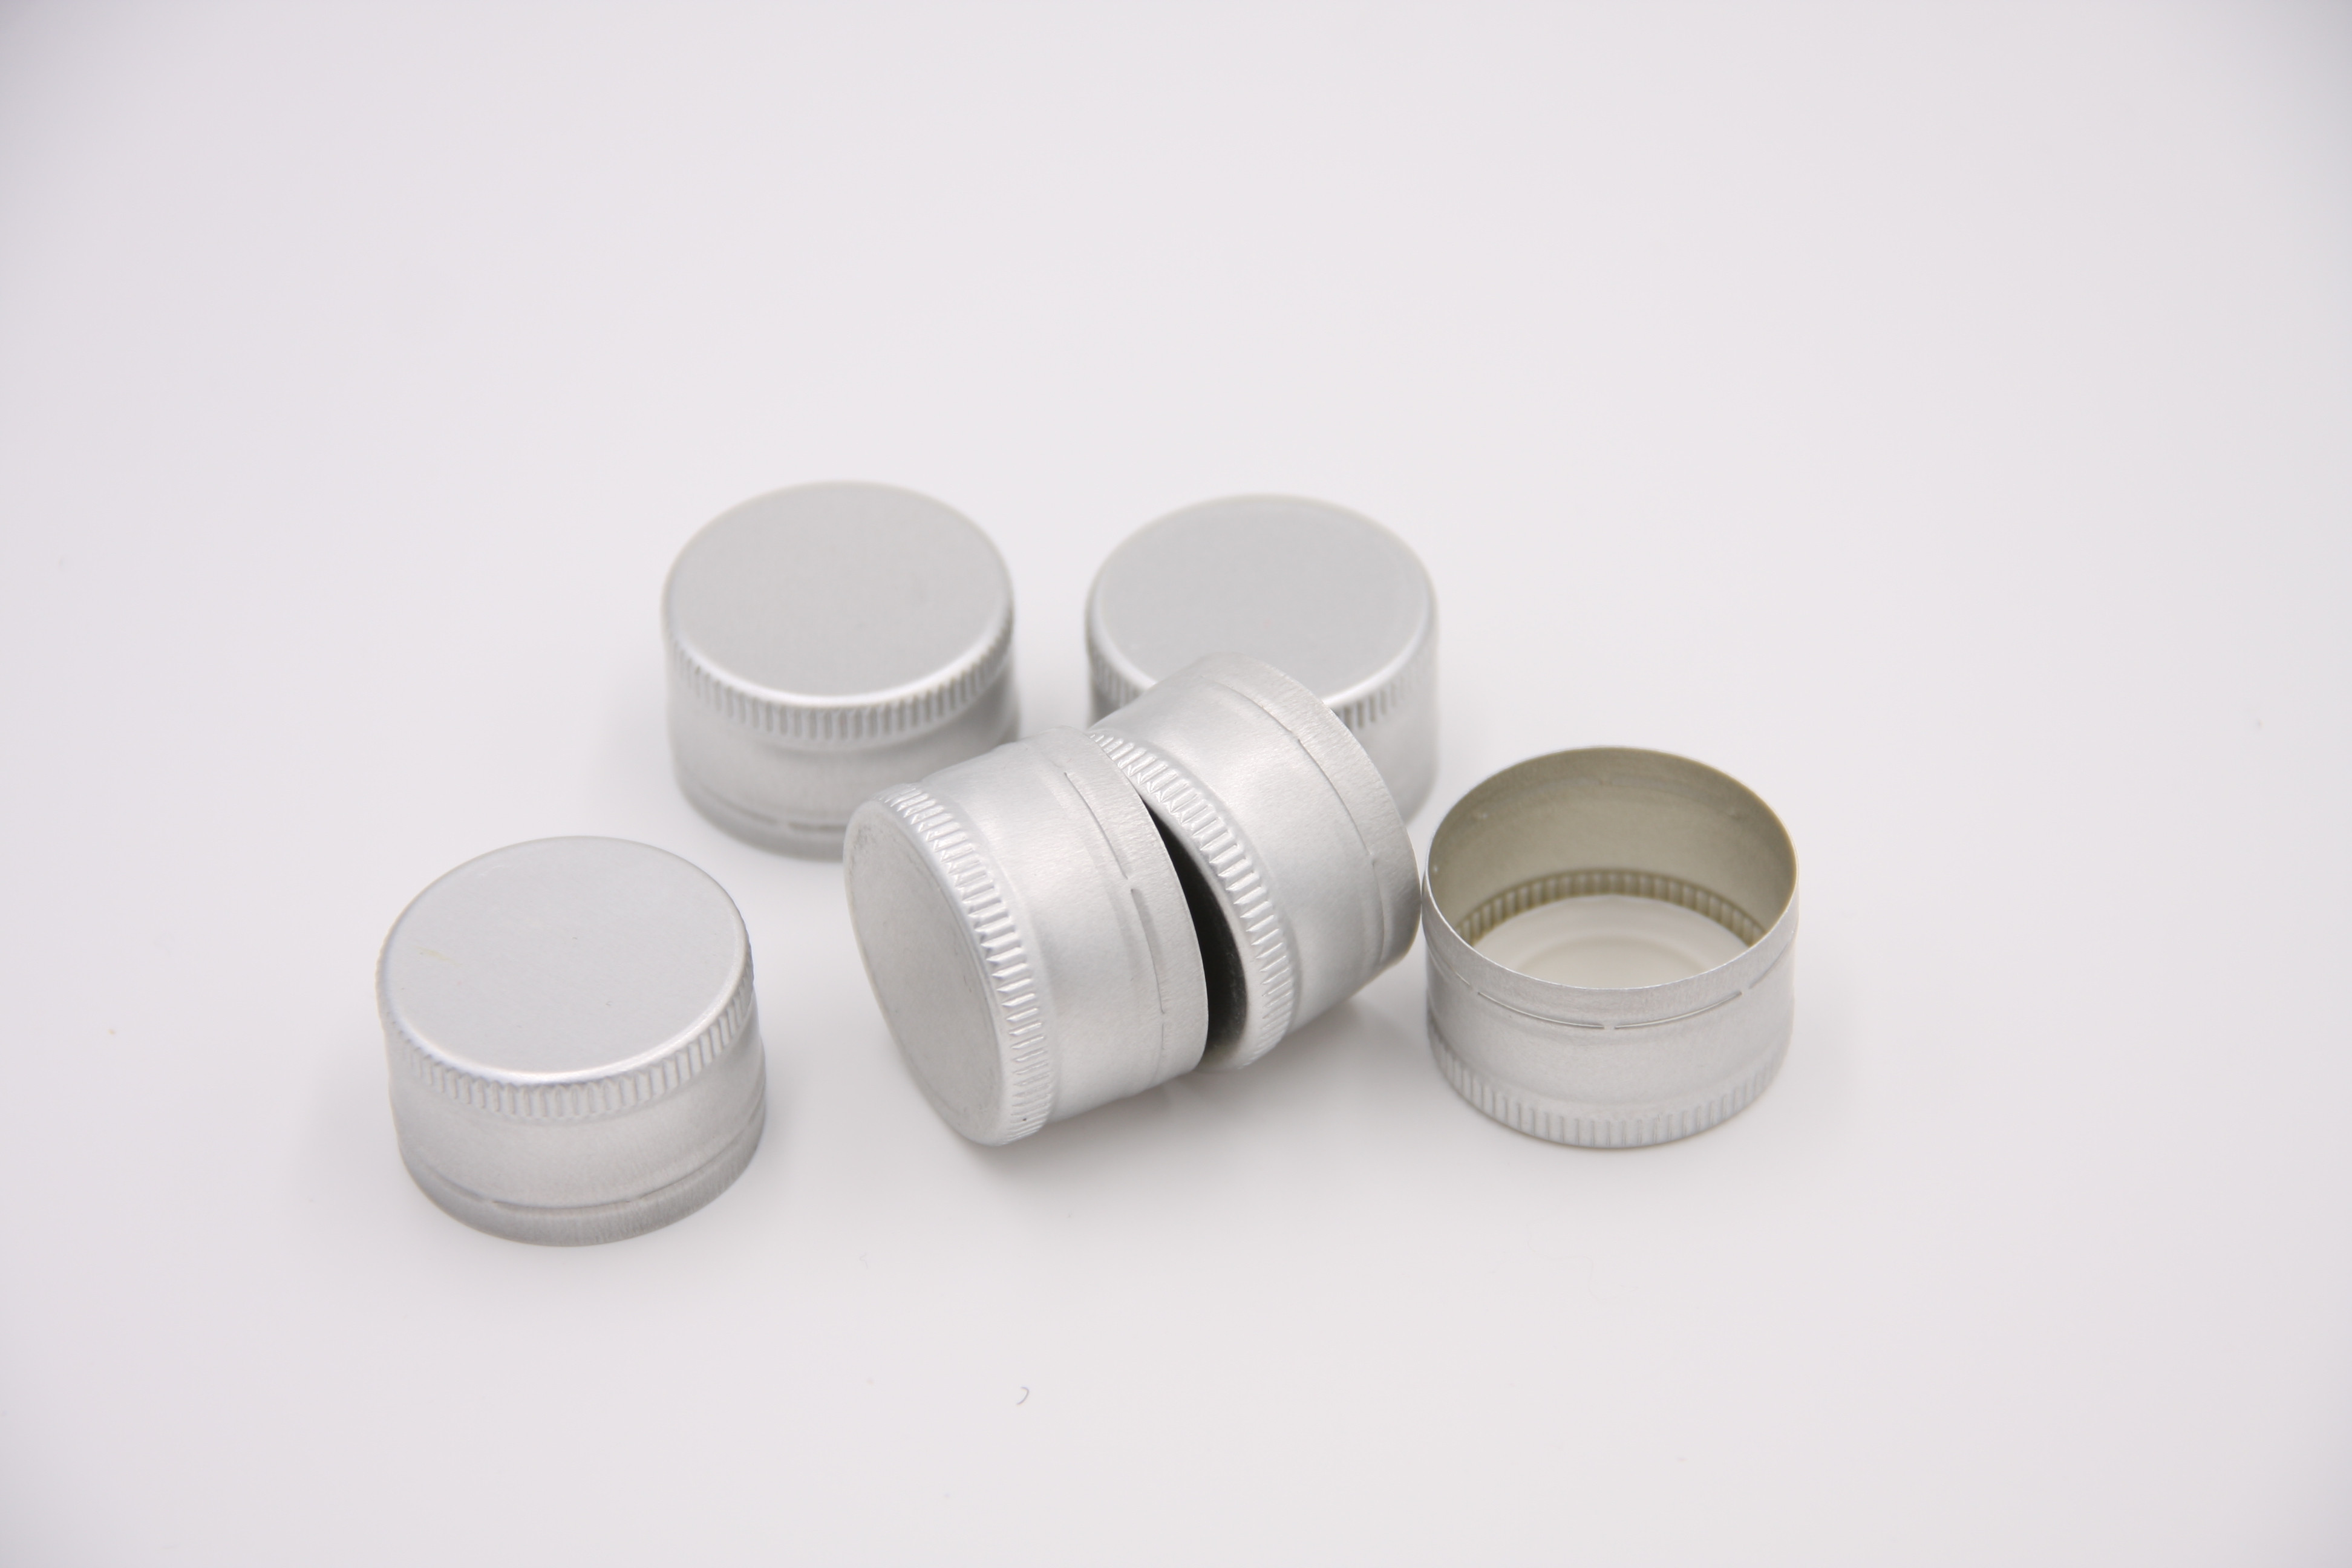 The sealing principle of the aluminum cover and Application of bottle cap